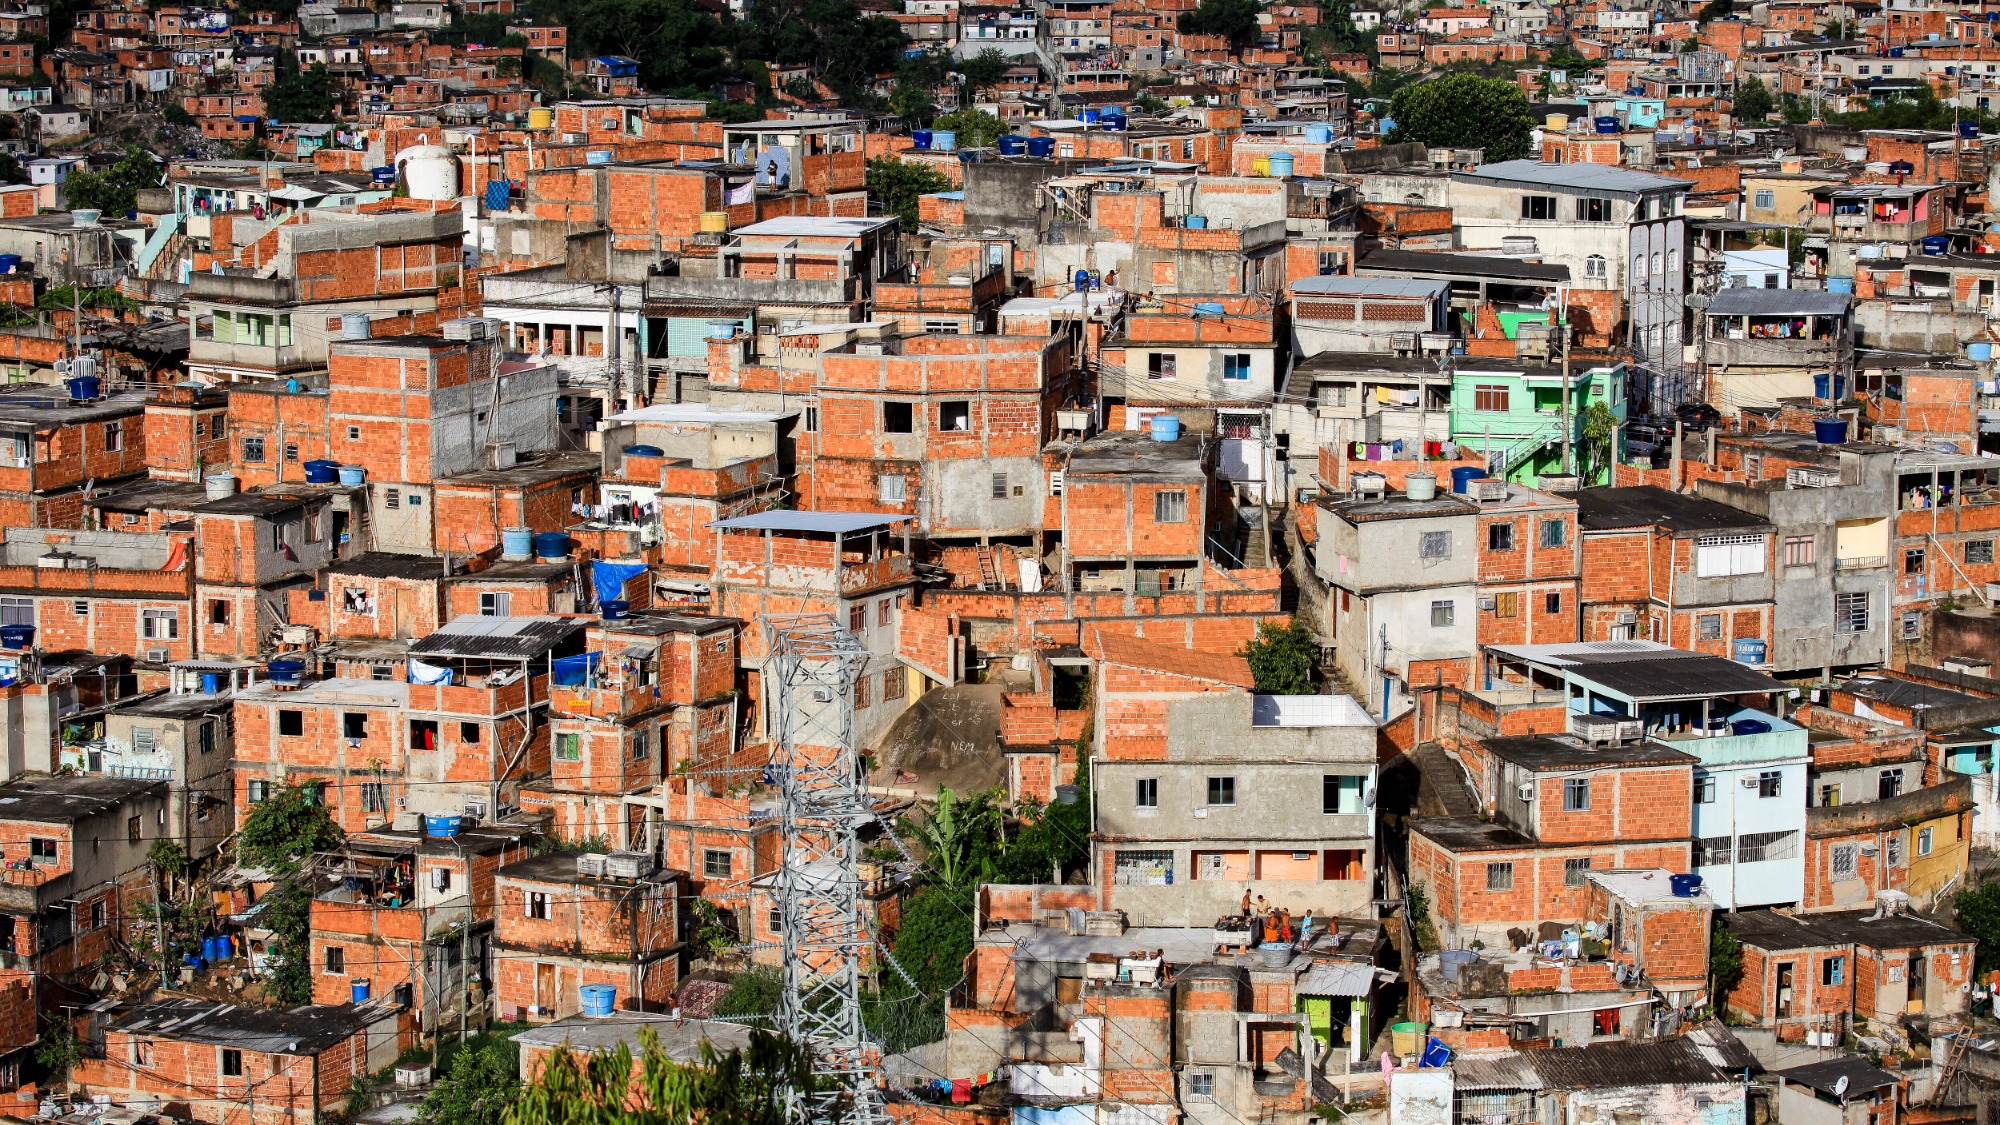 Favela do Alemao in Rio de Janeiro. Low-income urban communities like these tend to lack greenery and are more likely to face extreme heat than their wealthier or more rural counterparts.